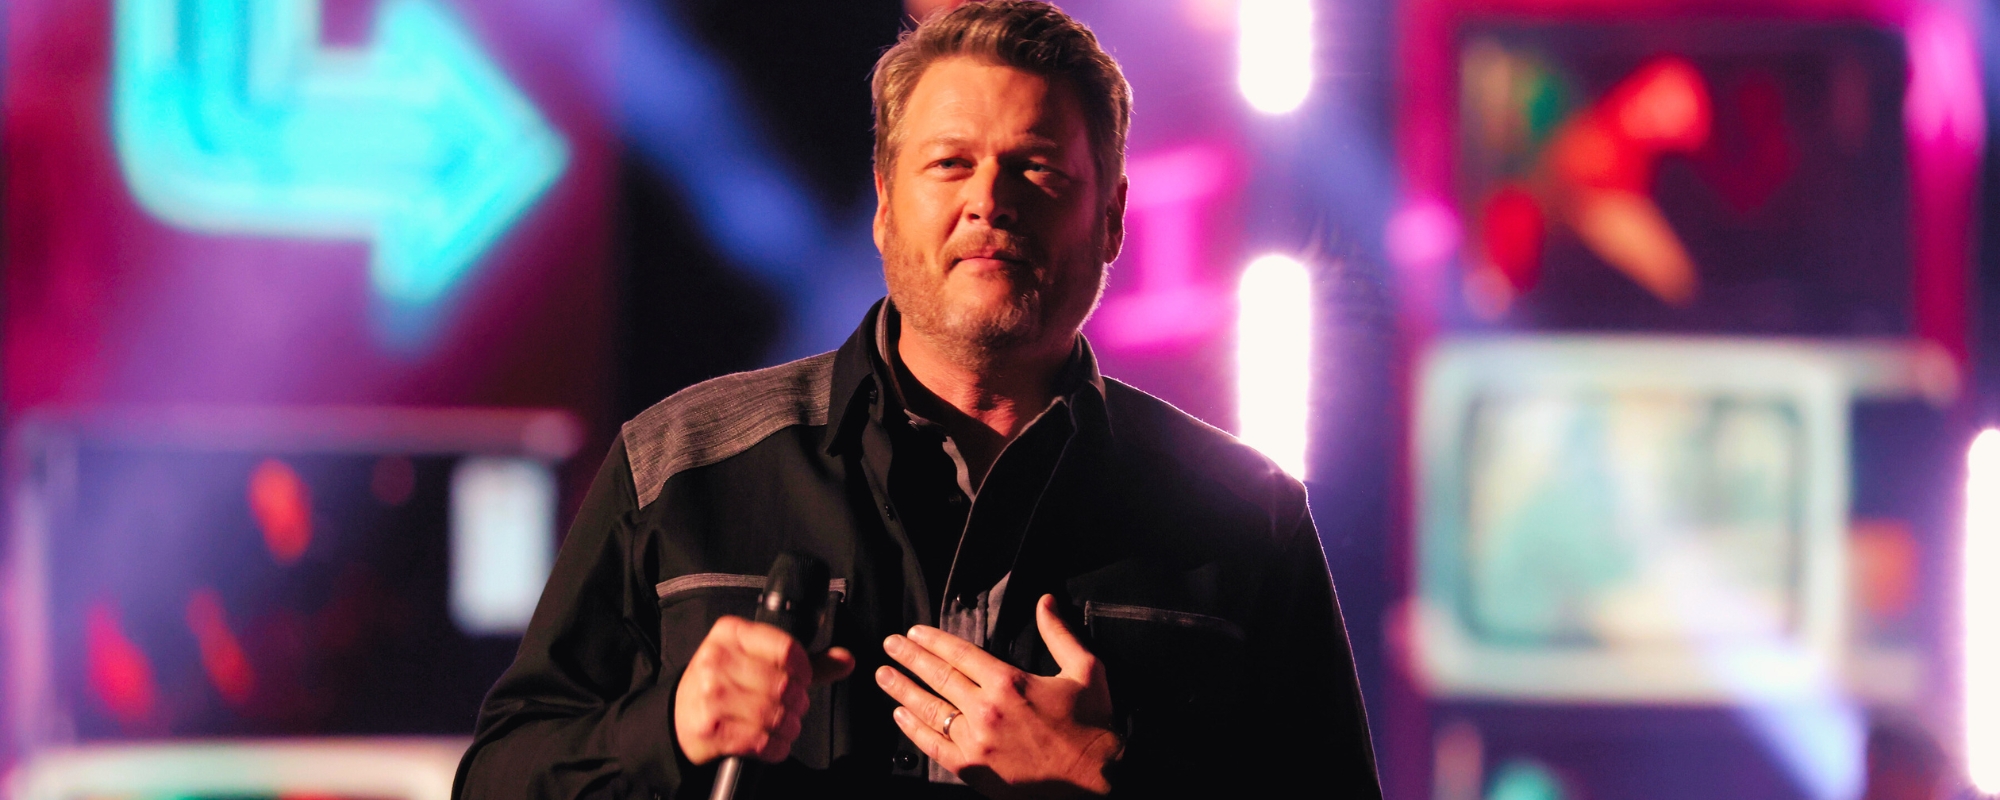 Blake Shelton Is Plotting a Music Competition Show to Dethrone ‘The Voice’: Report